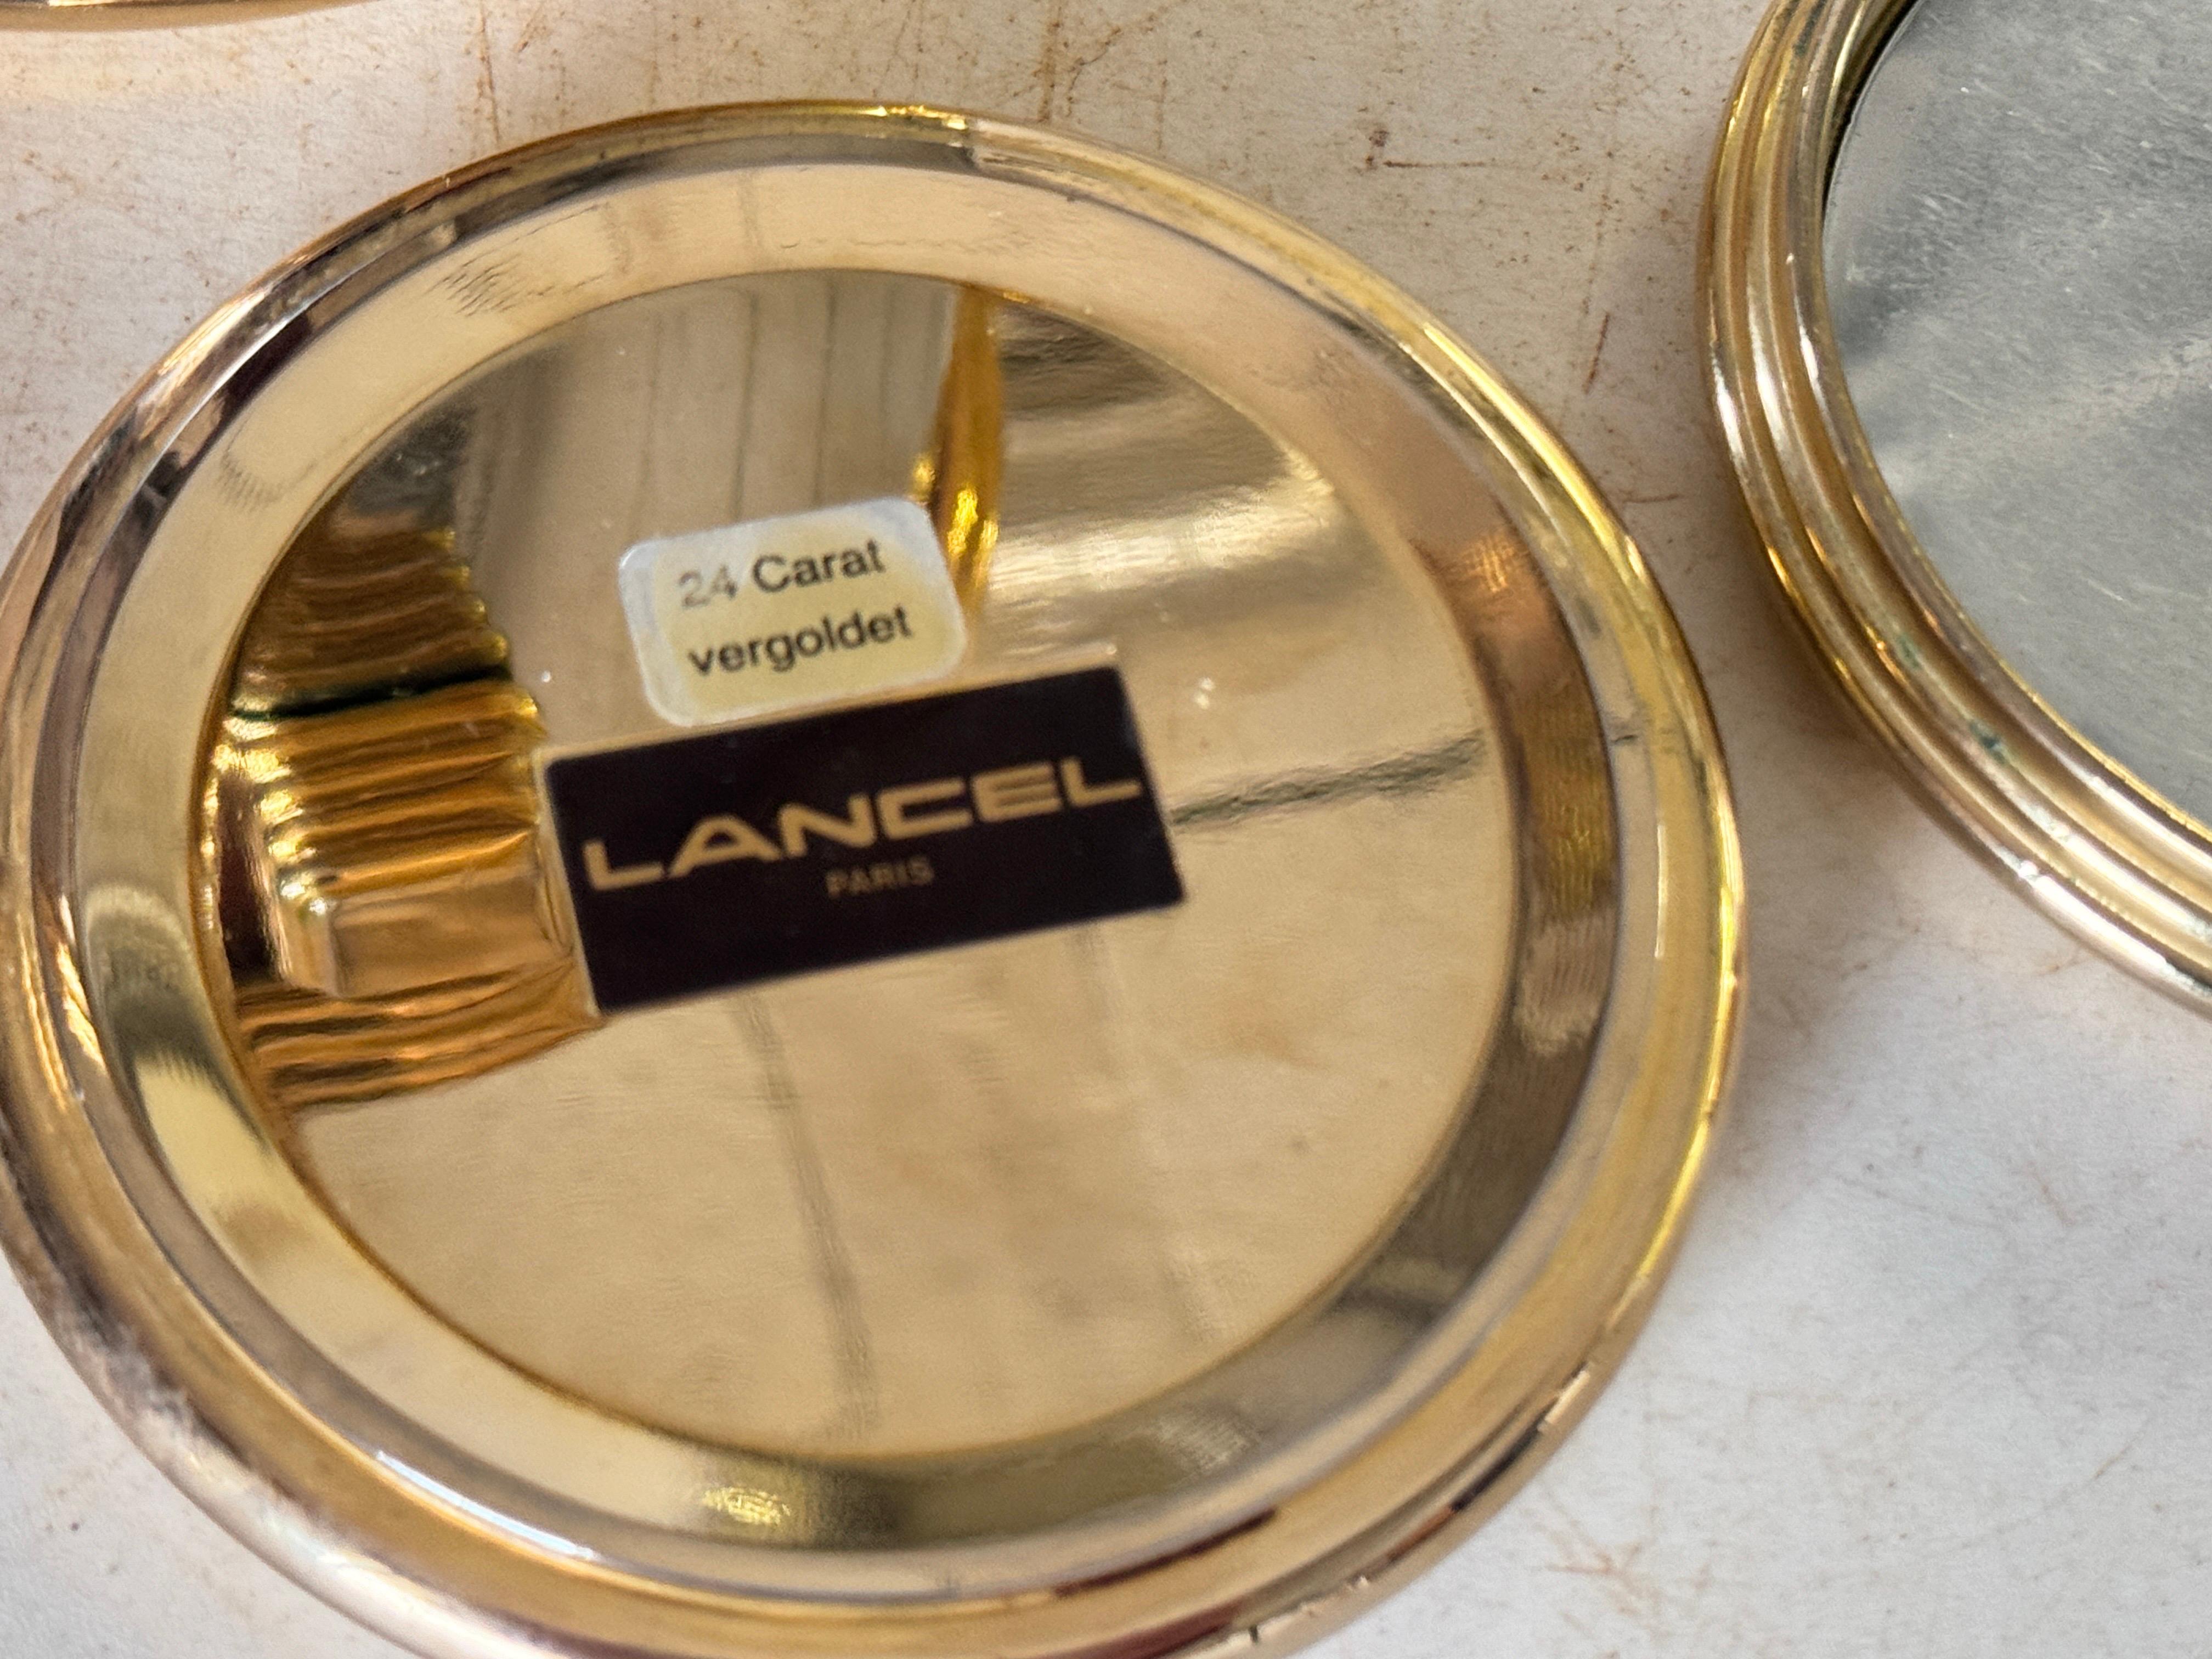 20th Century Champagne Bucket in Chrome and  Gold Plated Metal 24 karats By Lancel France  For Sale